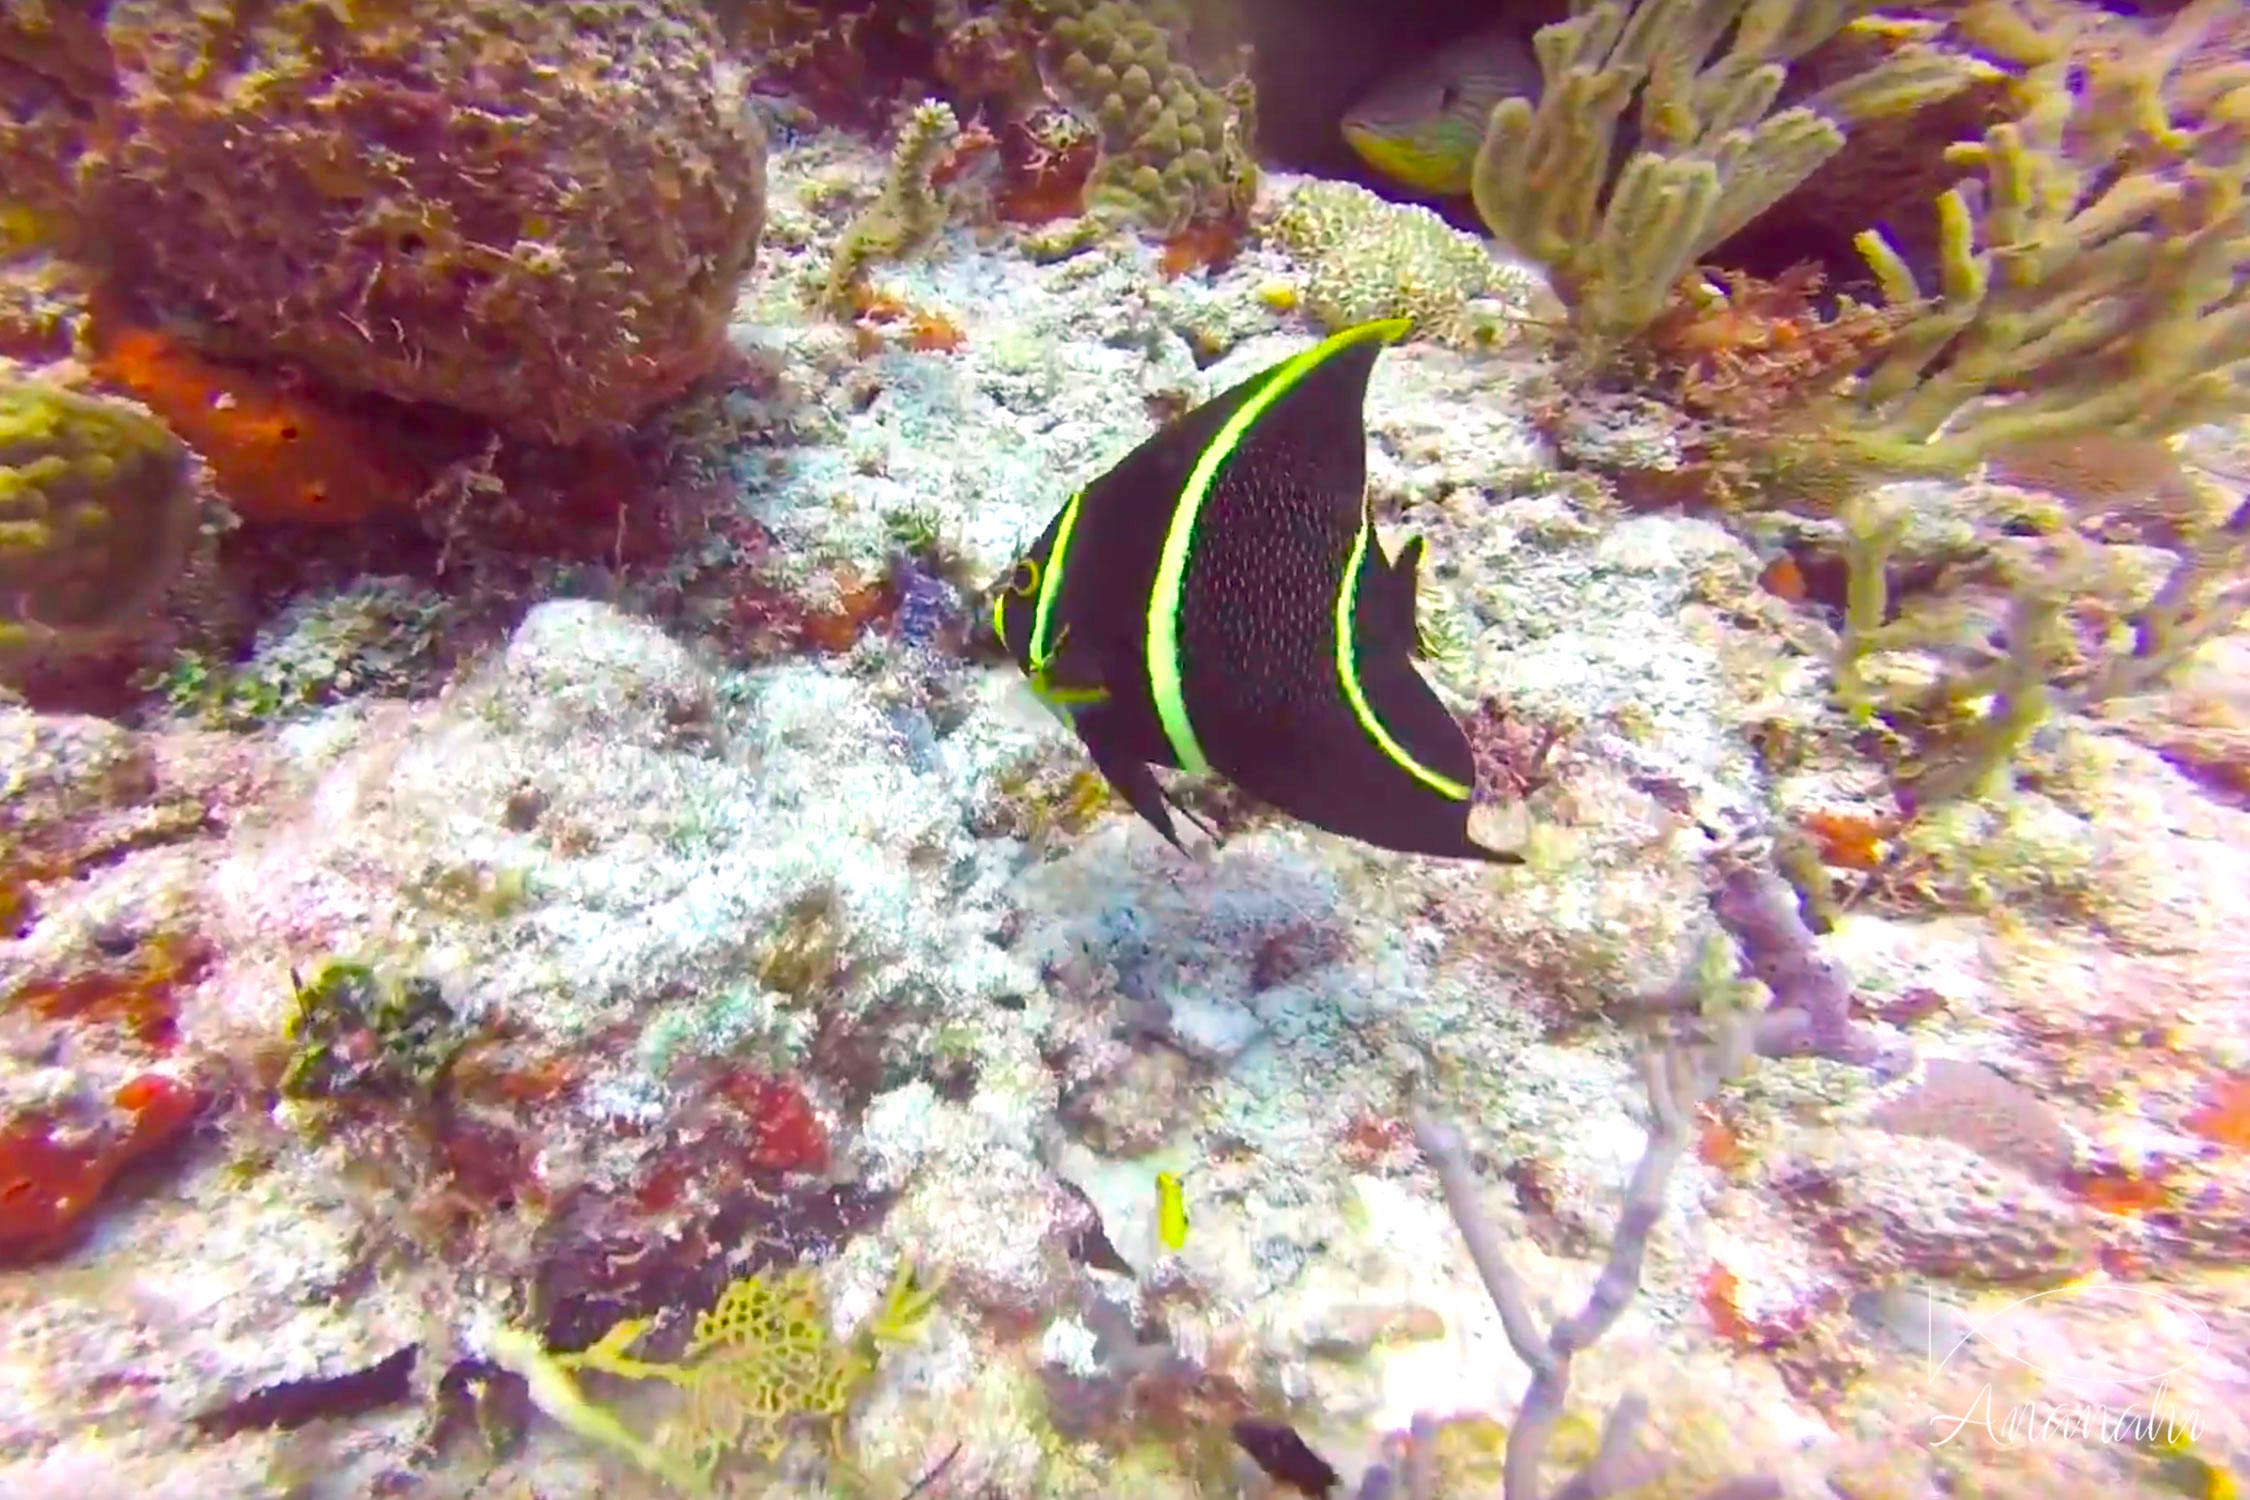 Juvenile french angelfish of Mexico